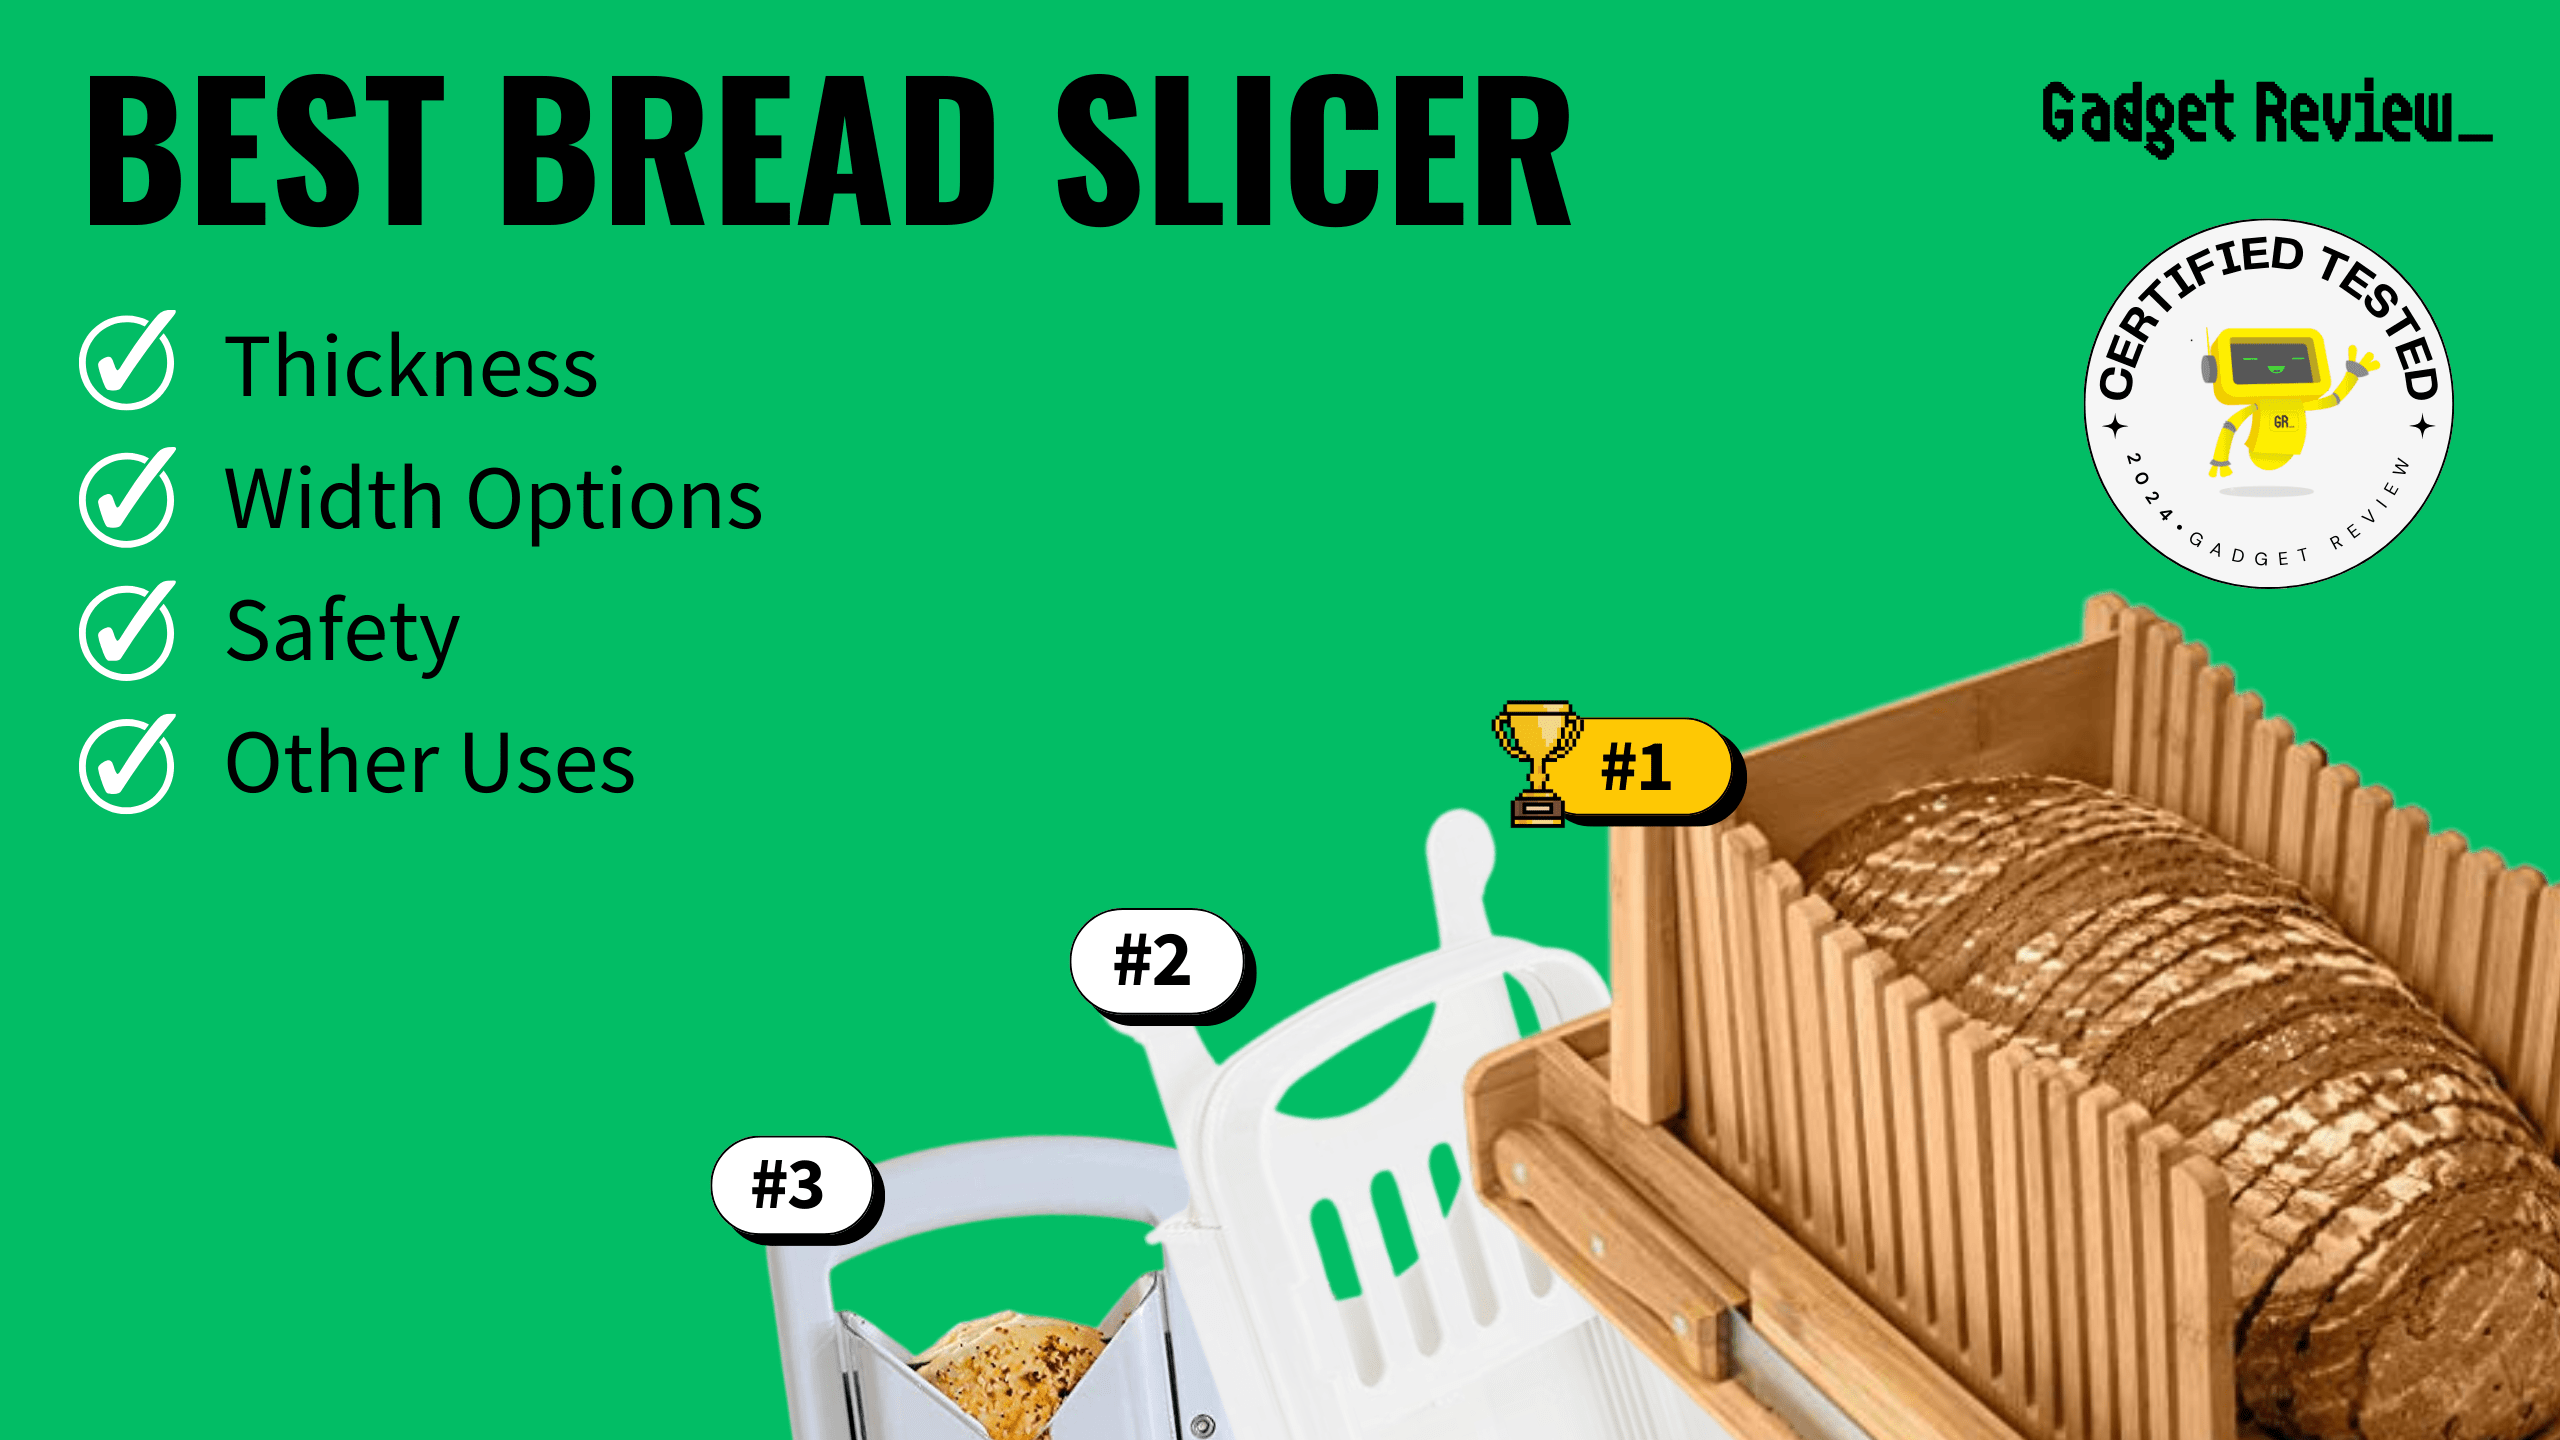 best bread slicer guide that shows the top best kitchen product model